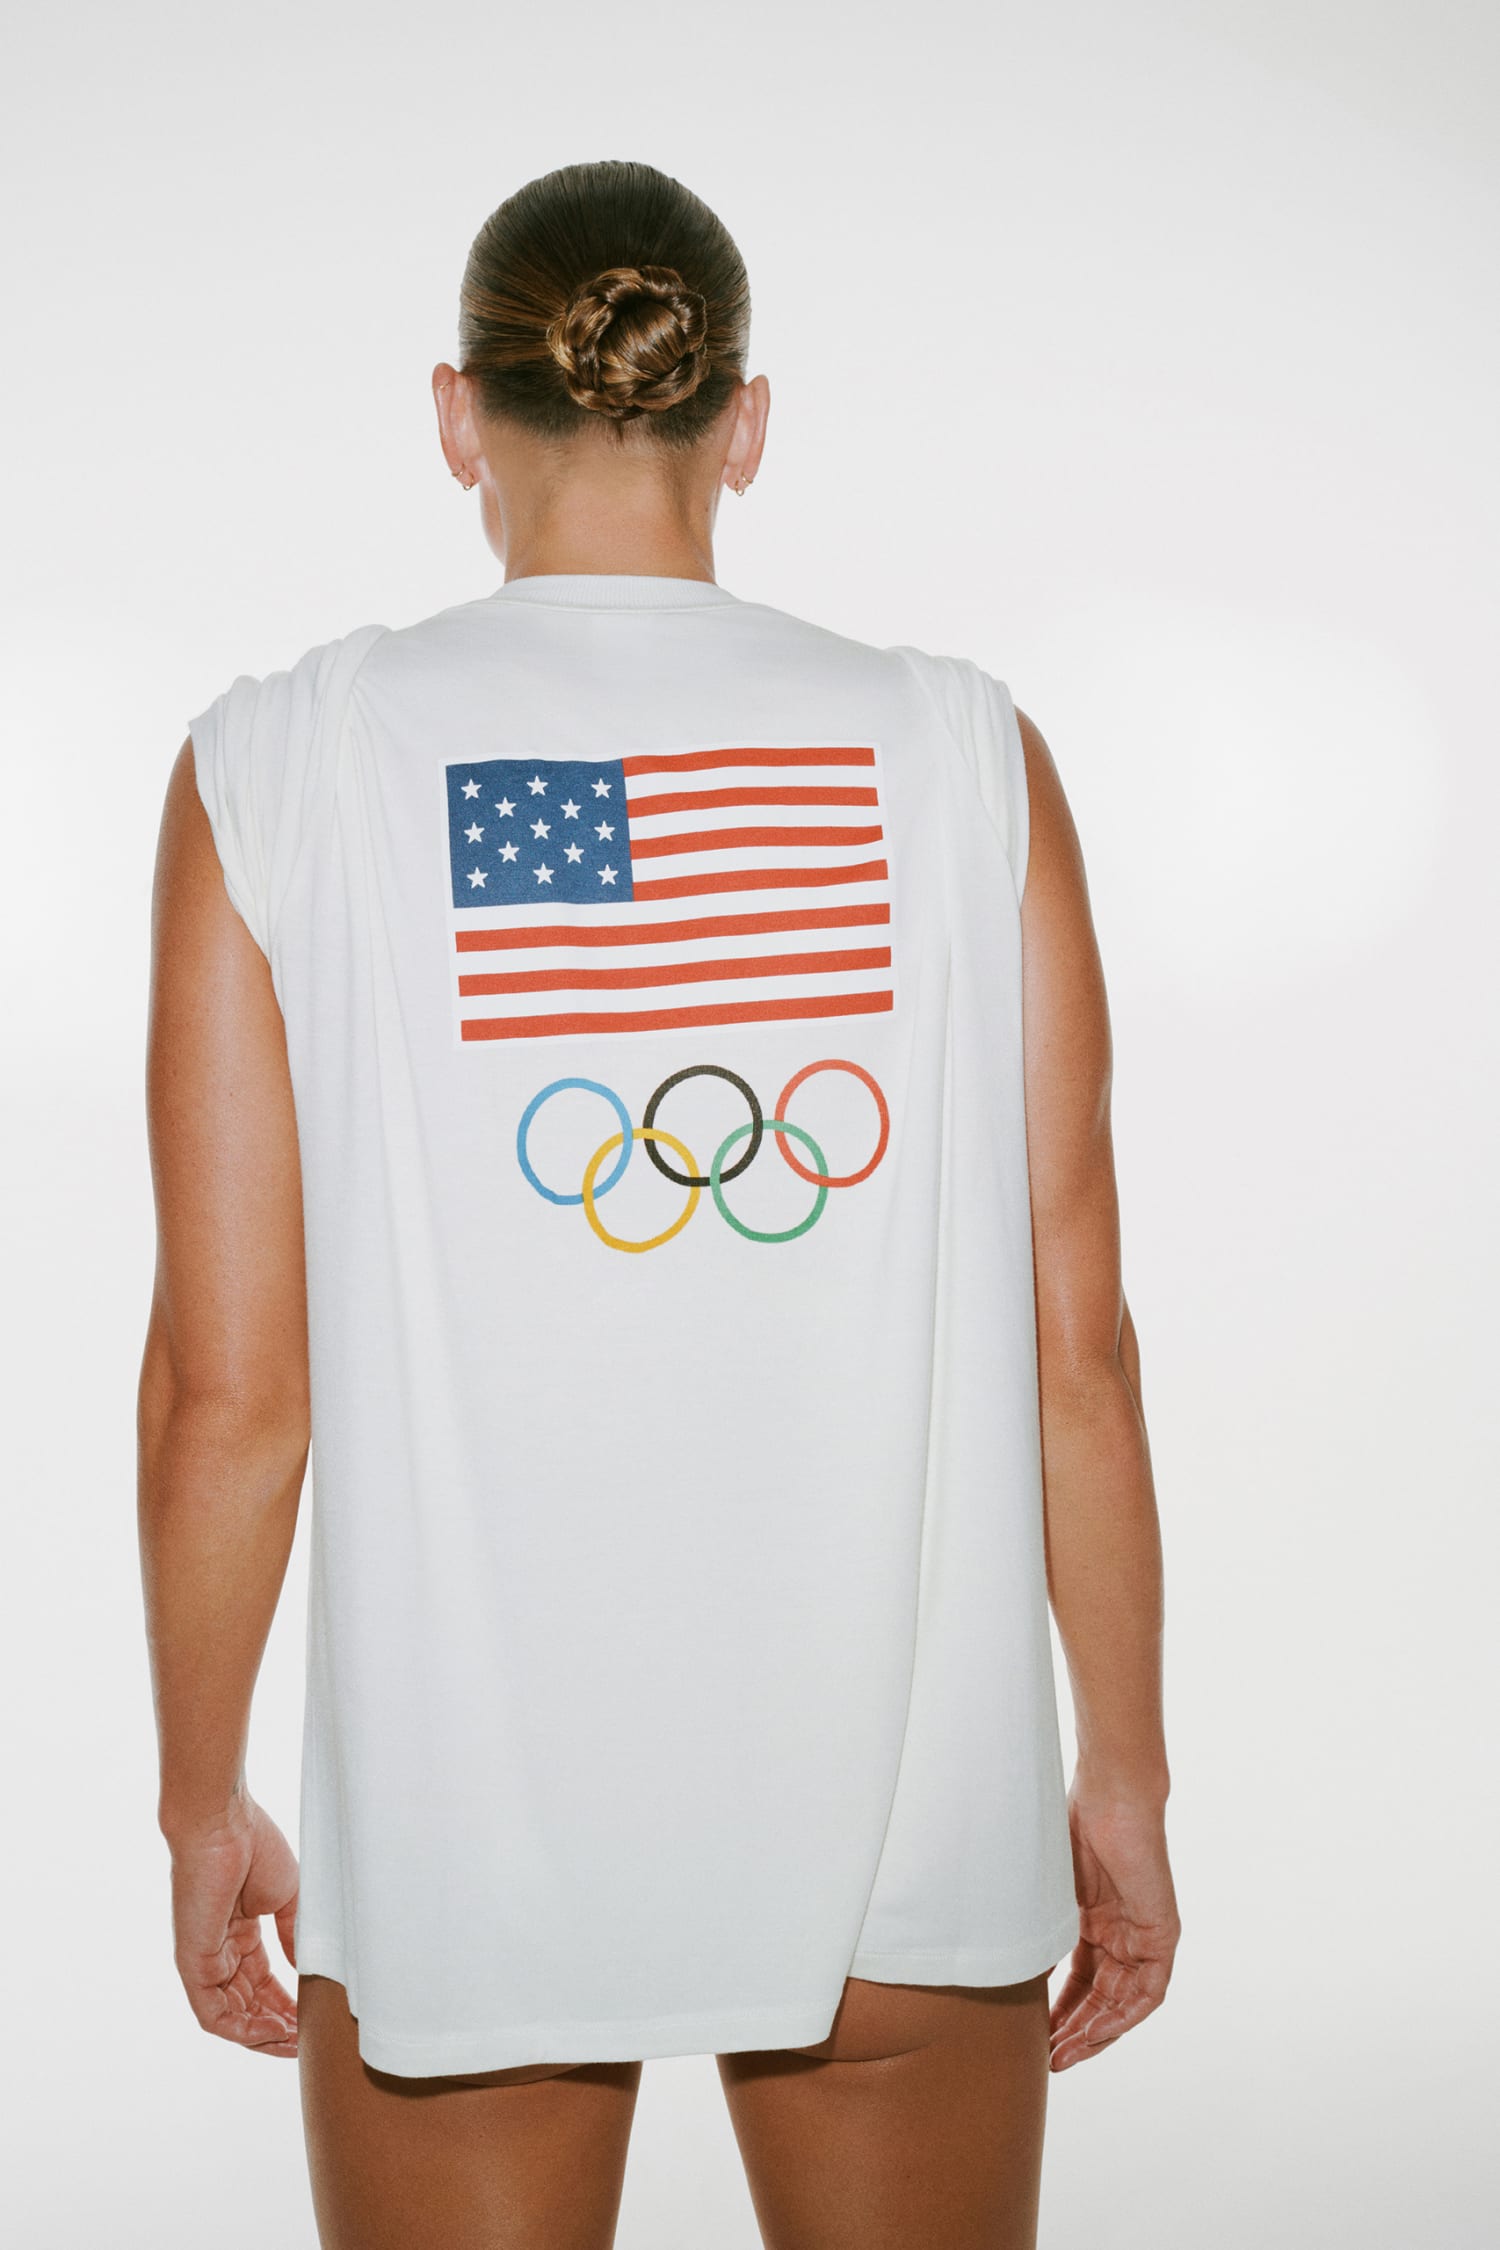 Kim Kardashian's SKIMS brand is designing the official undergarments for  Team USA at the Olympics - The Sauce